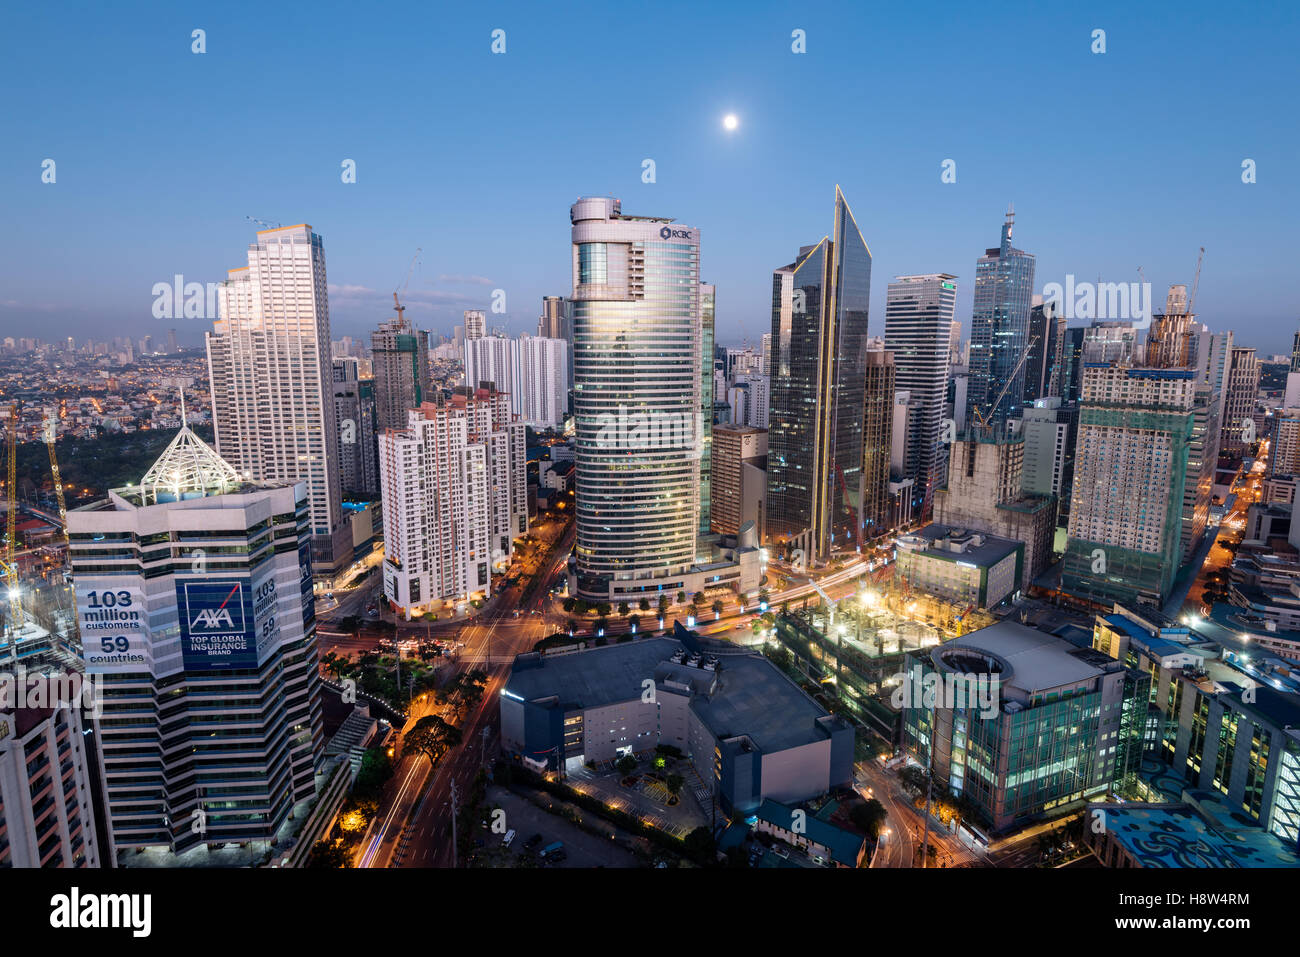 Makati Skyline at night. Makati is a city in the Philippines` Metro Manila region and the country`s financial hub. Stock Photo